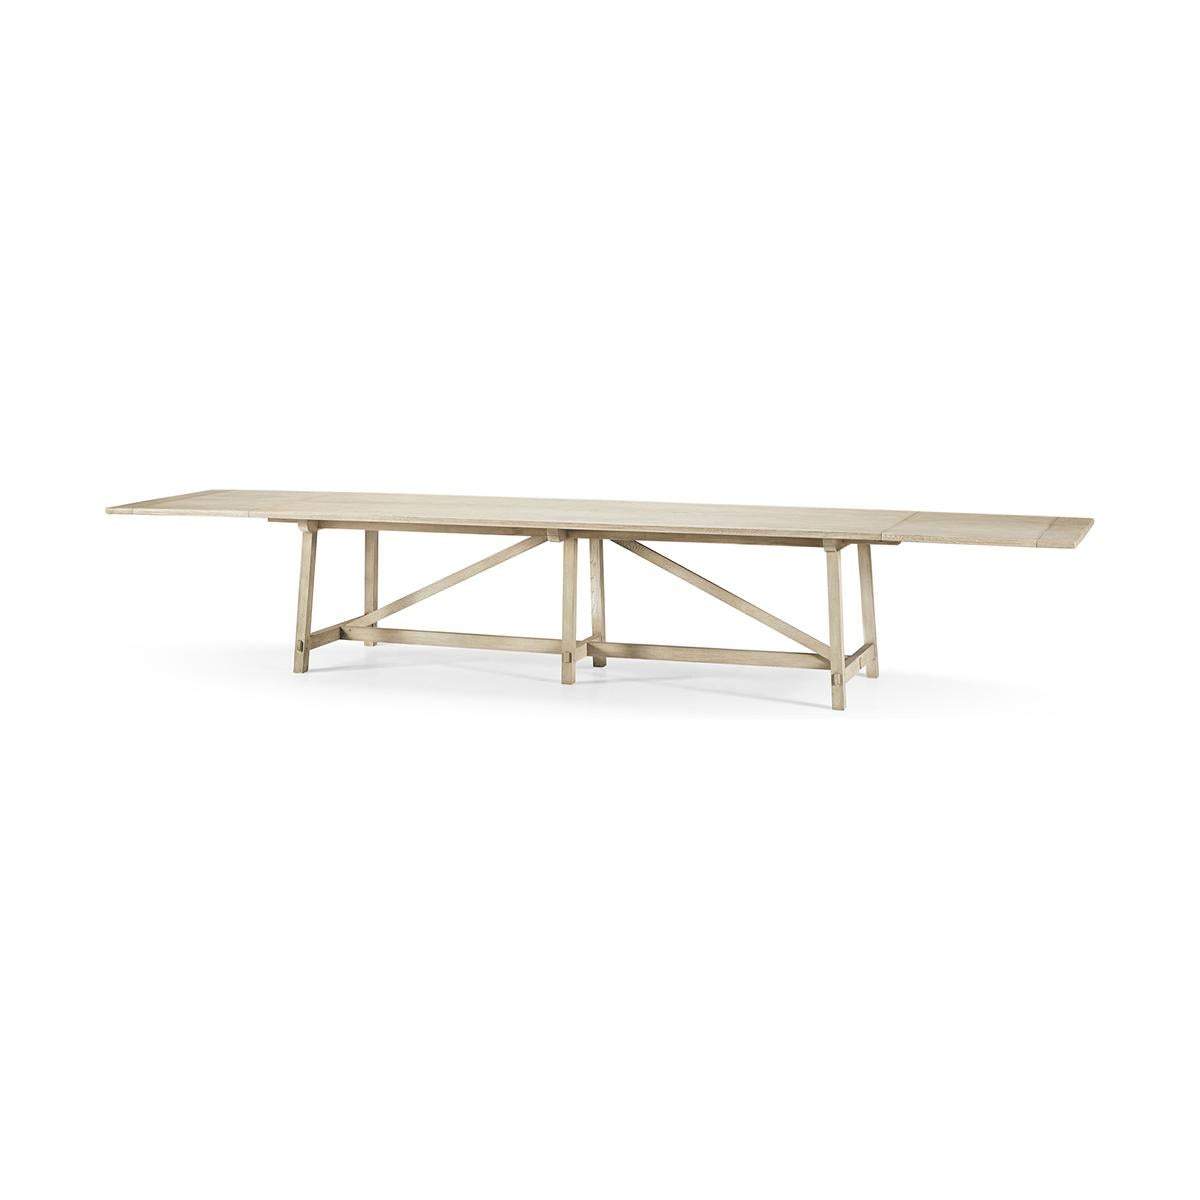 The French Laundry dining table is the perfect combination of unparalleled furniture craftsmanship, elegant functional solutions, and inspiring design. Powerful honed forms in stripped oak elicit a raw appreciation for natural materials and offer a